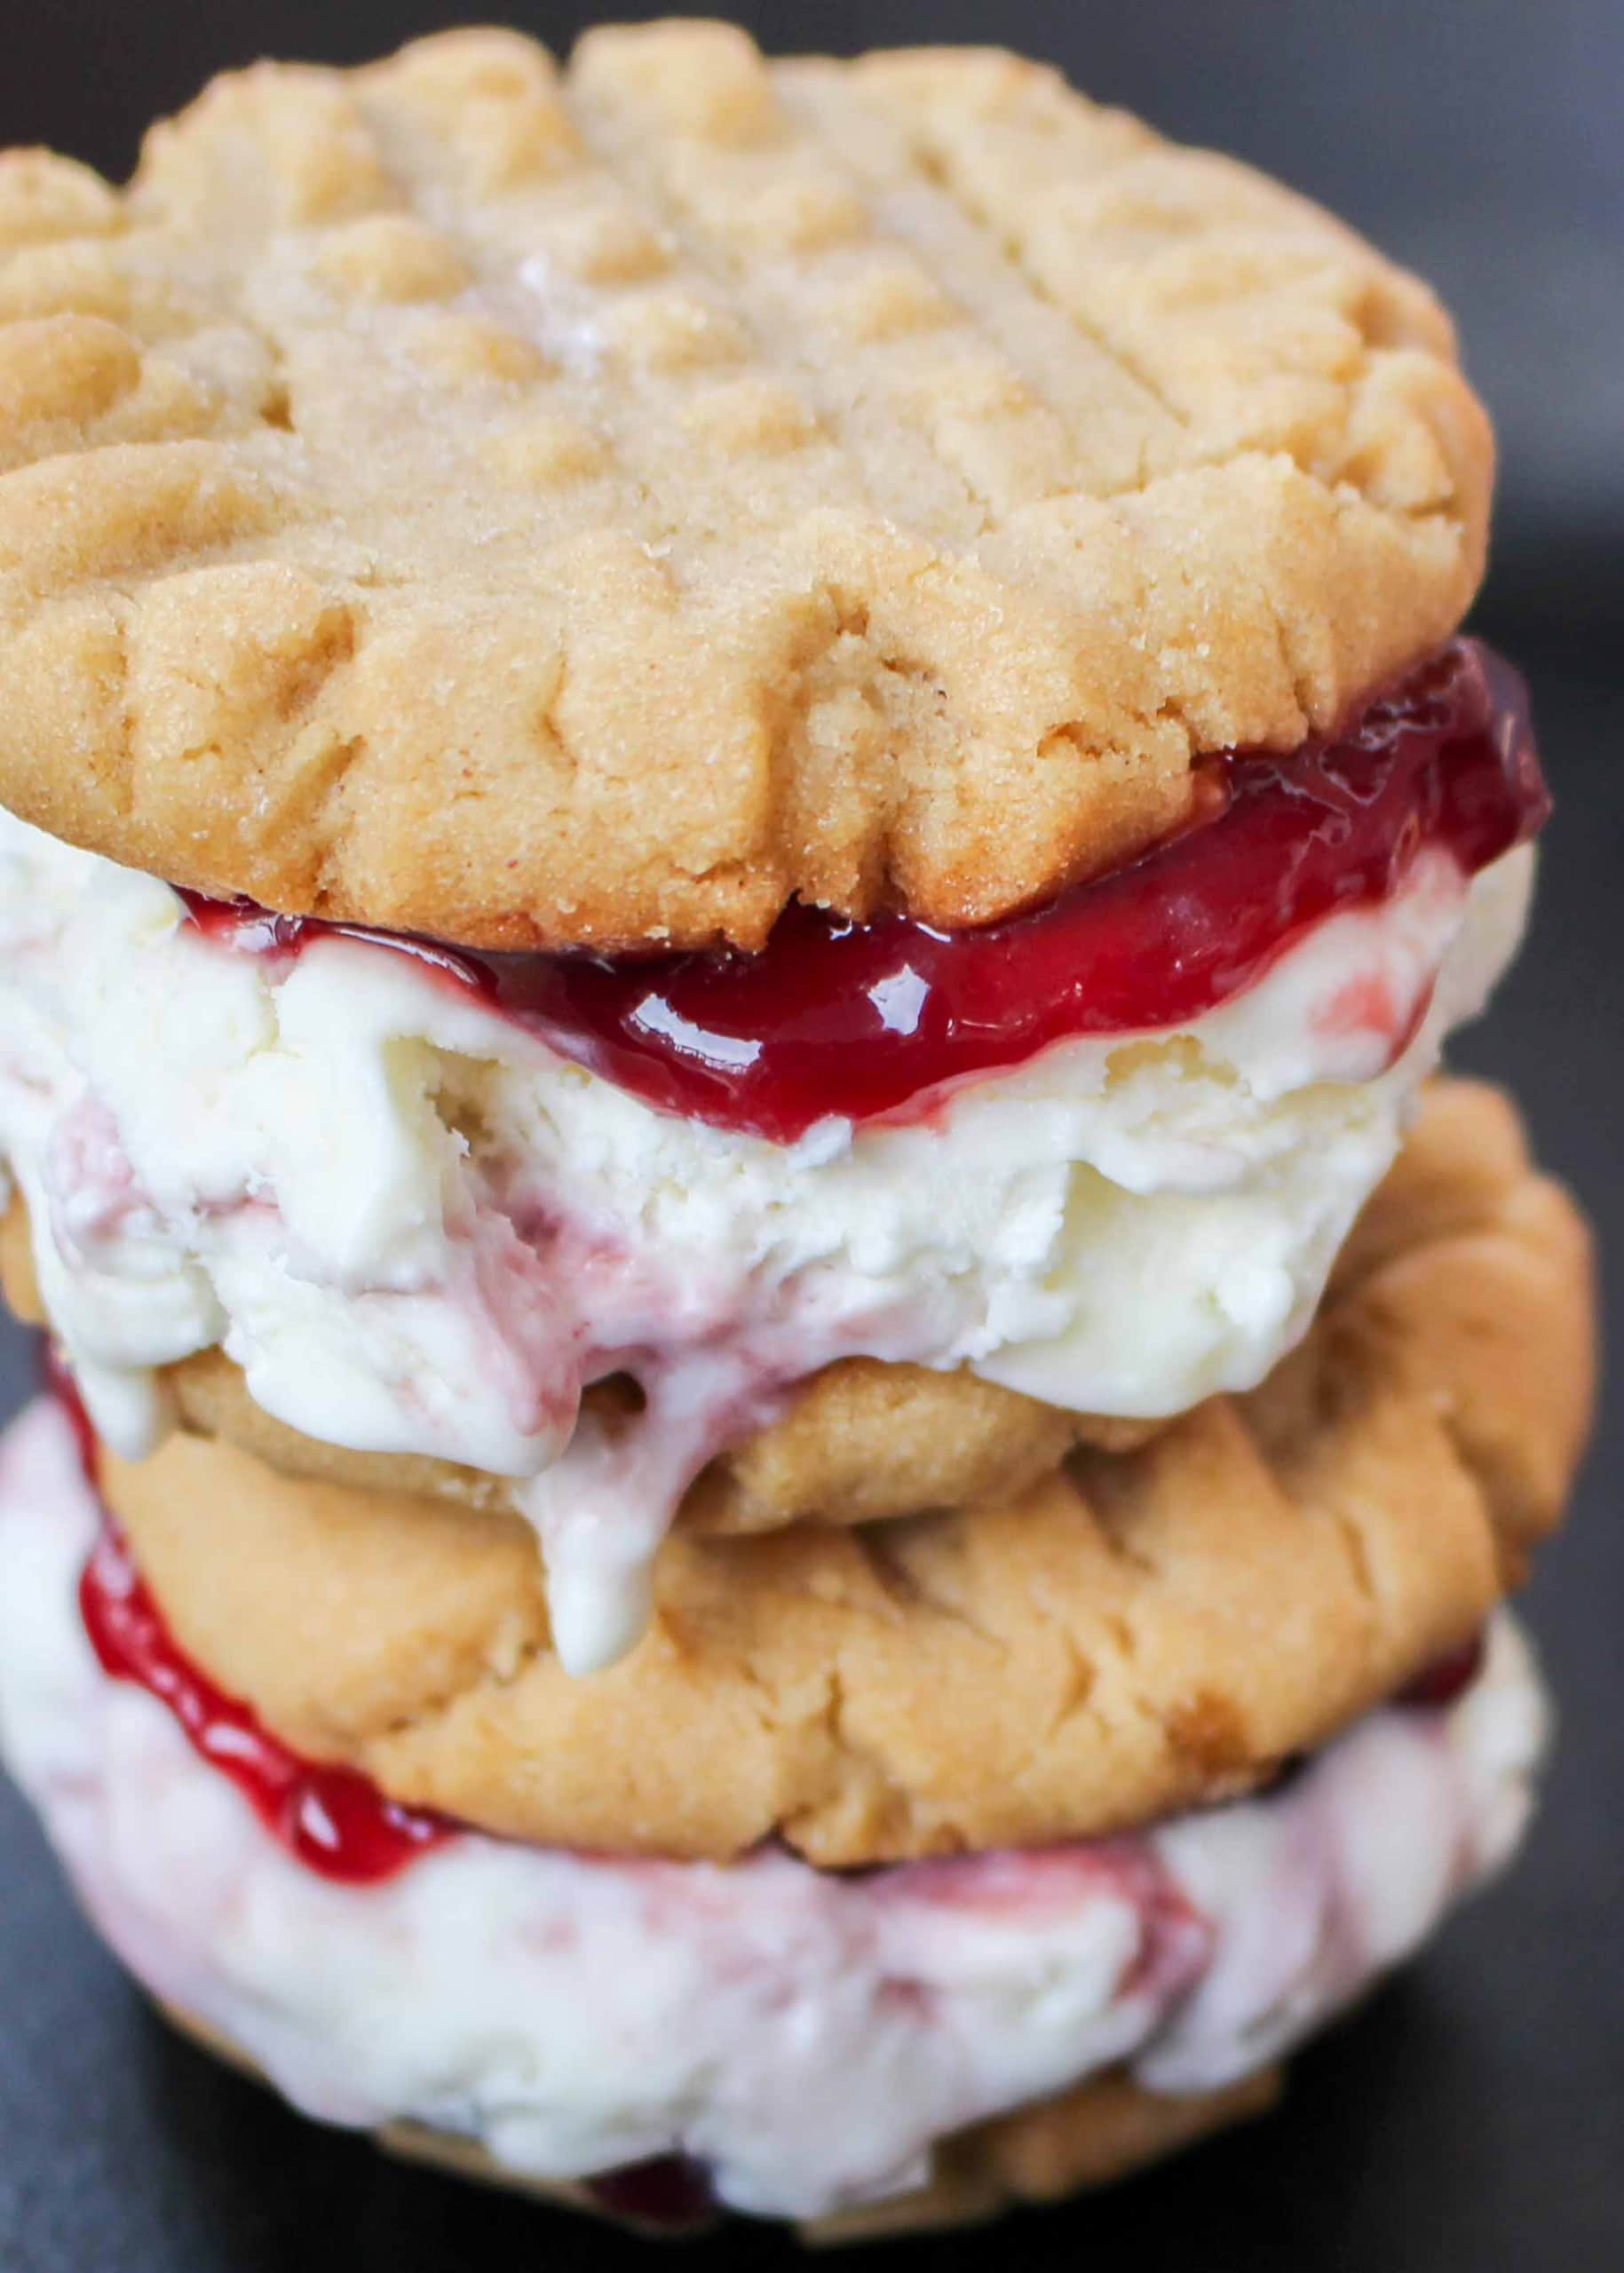 Peanut Butter and Jelly Ice Cream Sandwich - Chocolate with Grace